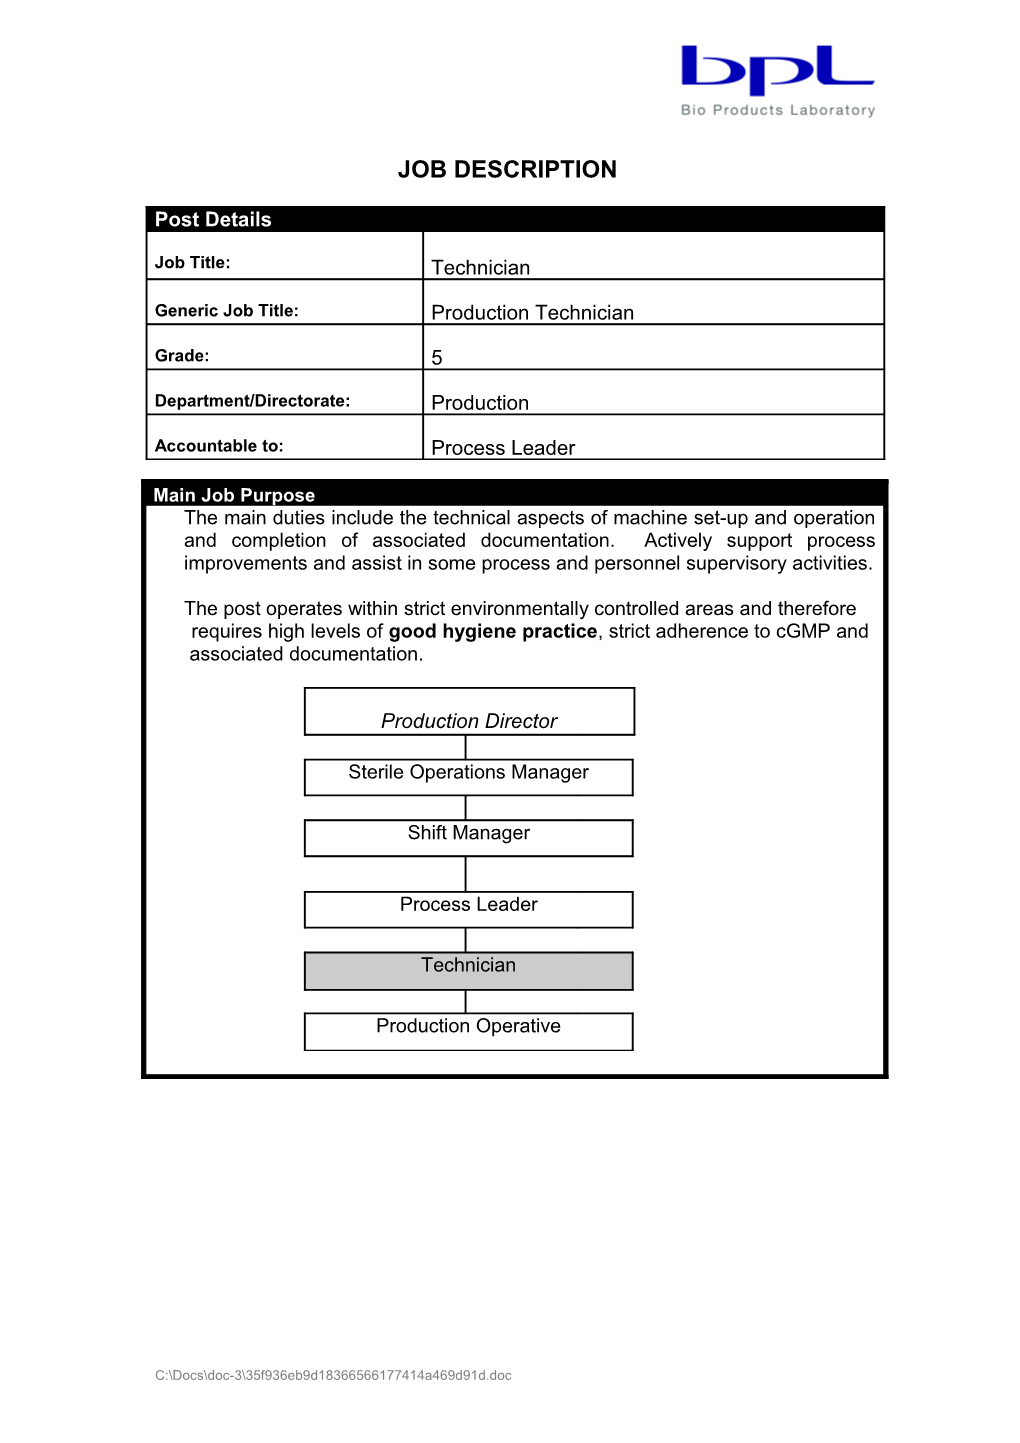 Specific Requirements for Aseptic Filling Area Operatives